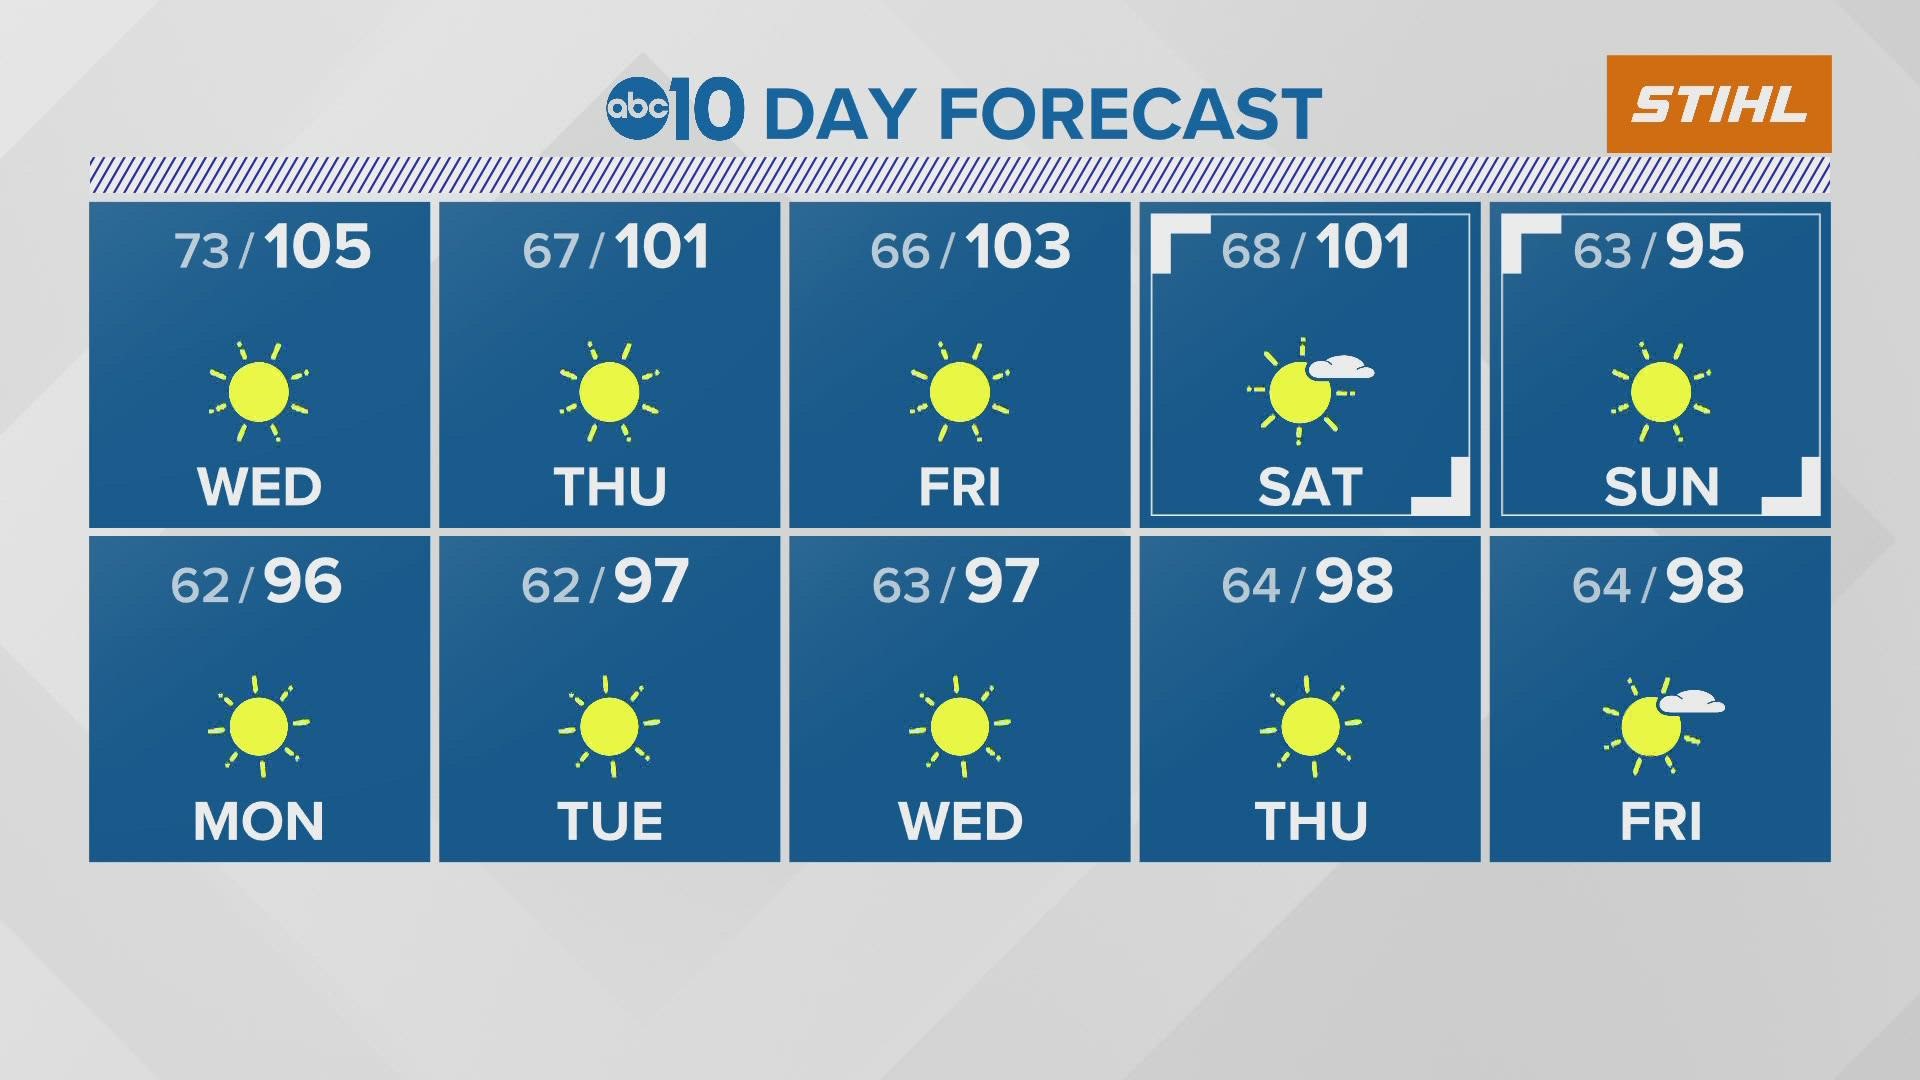 ABC10 Chief Meteorologist Monica Woods tells us what to expect for the next 10 days of weather